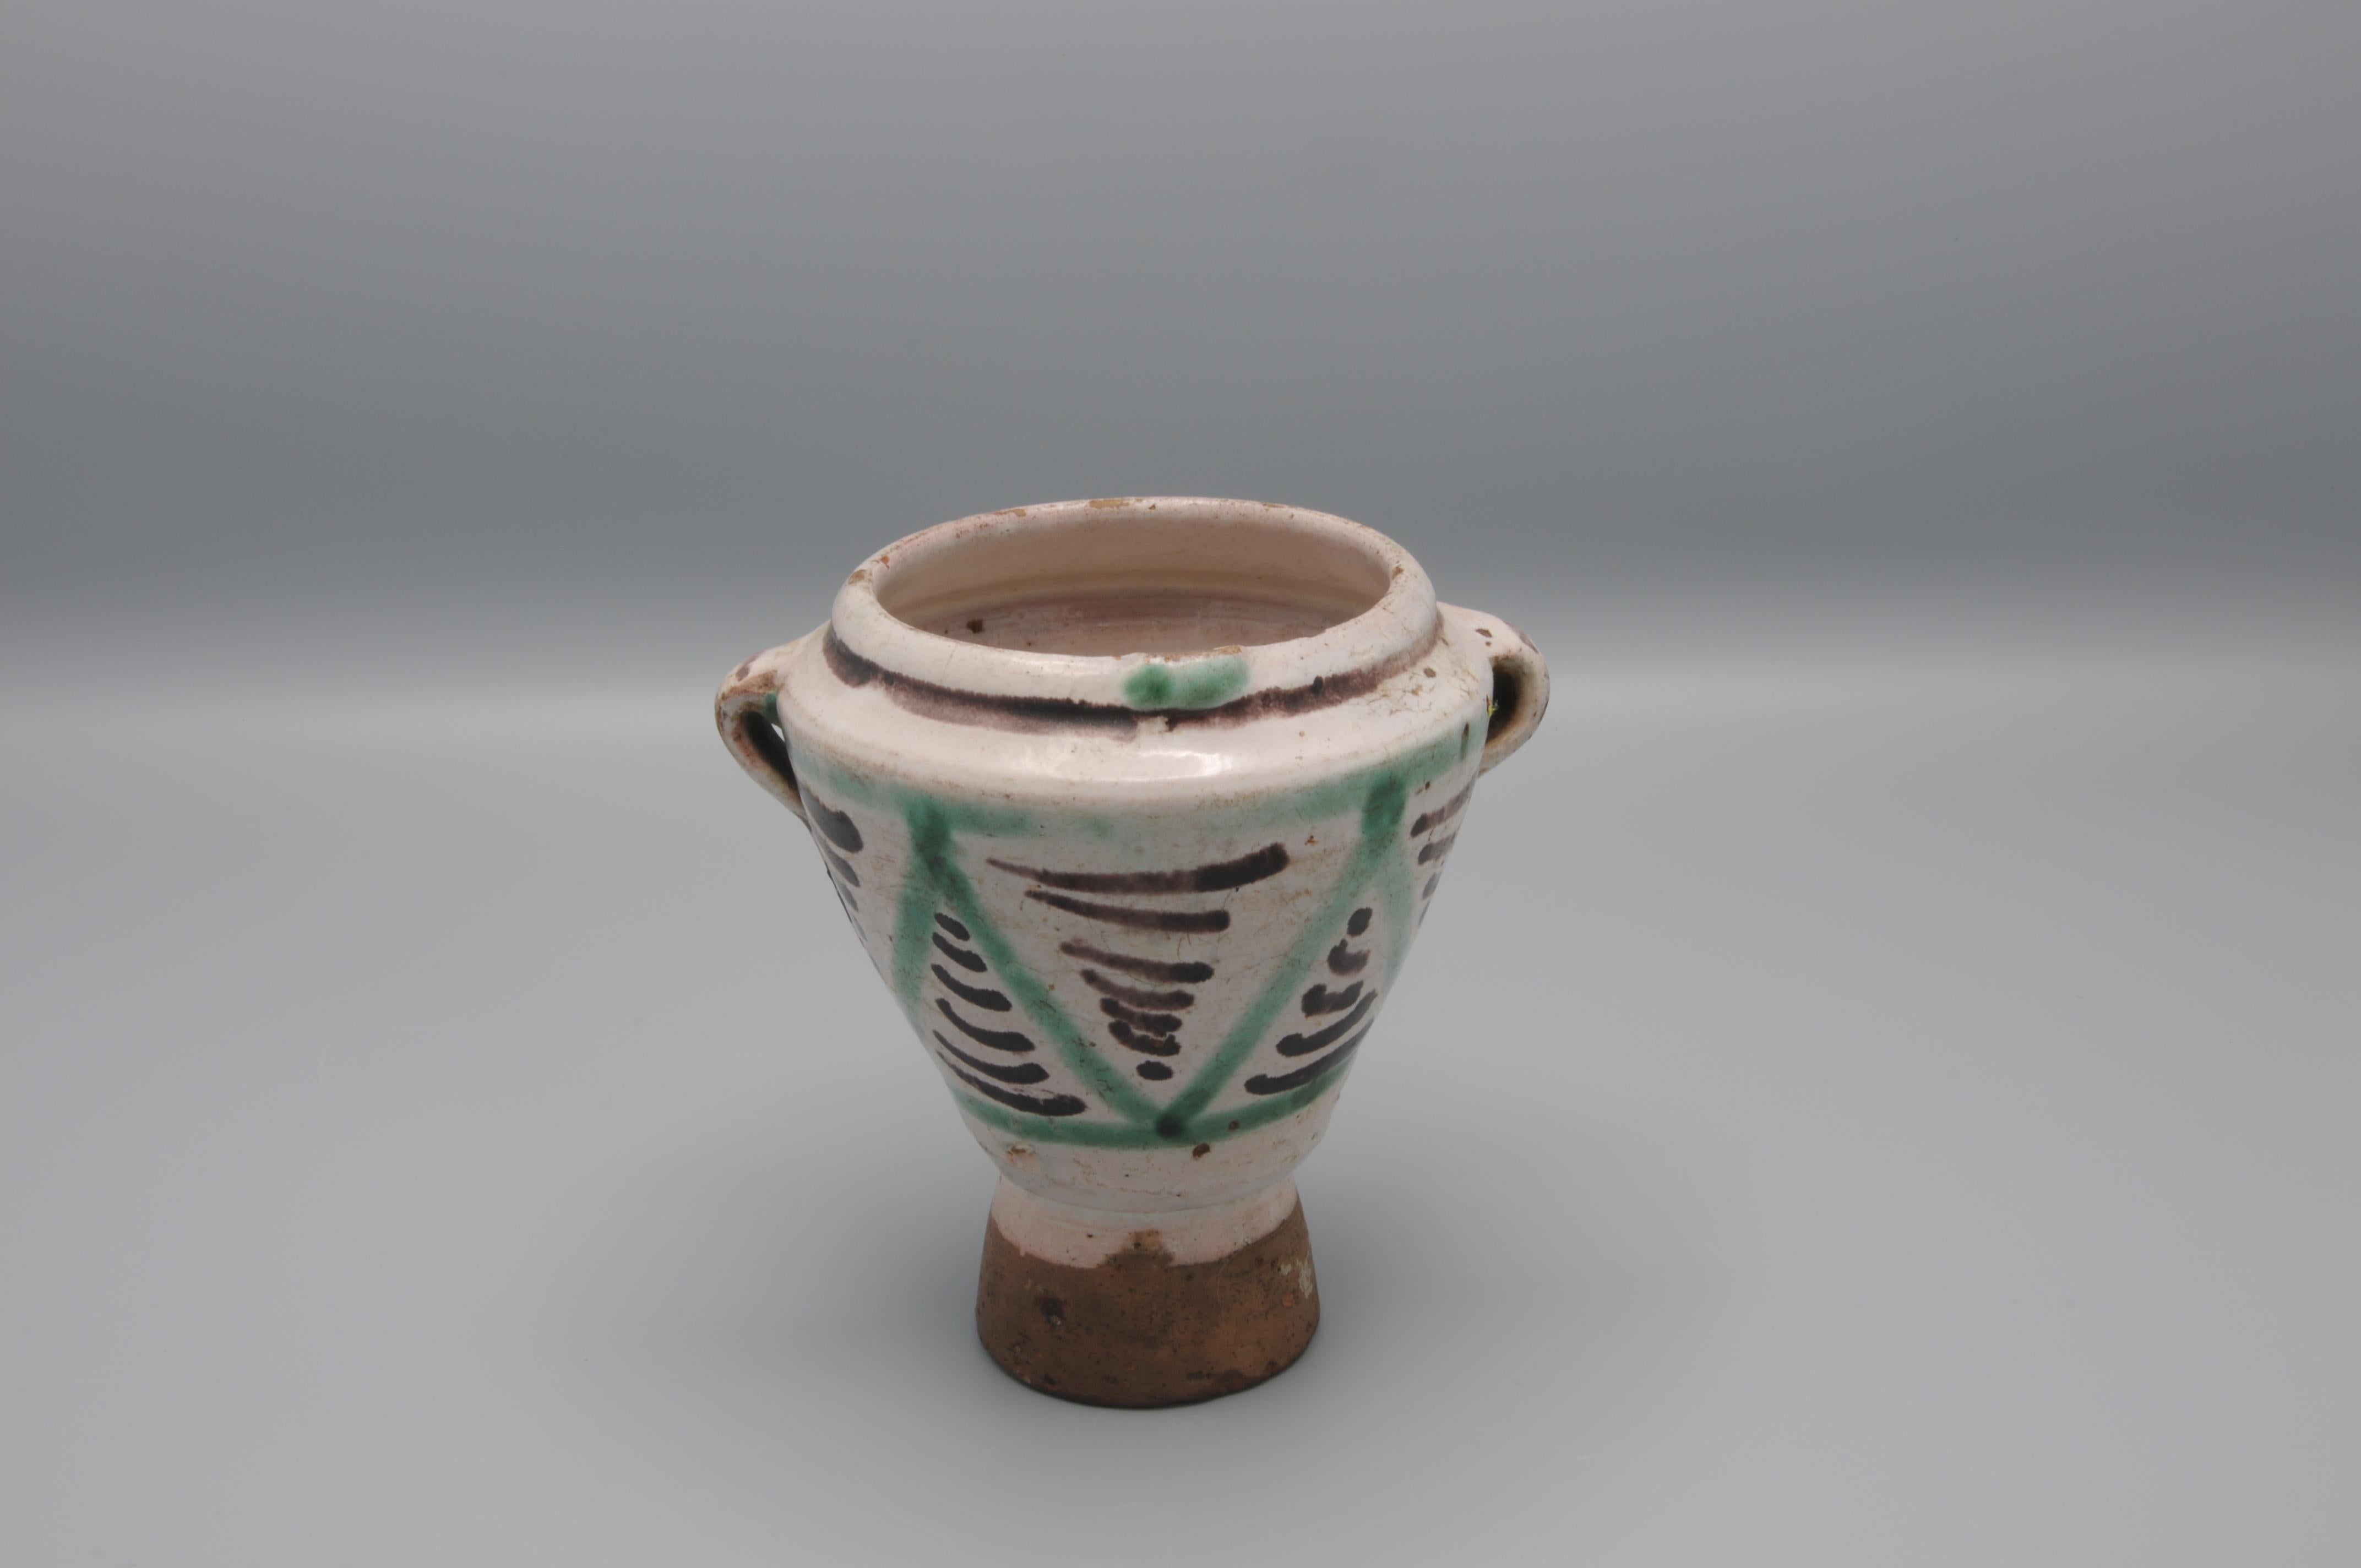 Ceramic mortar produced at the Teruel pottery workshops in the 17th century.
It has a truncated cone shape with three handles and a pourer. It is tin-glazed in a milky white, except for the unglazed foot. It is also decorated with green and